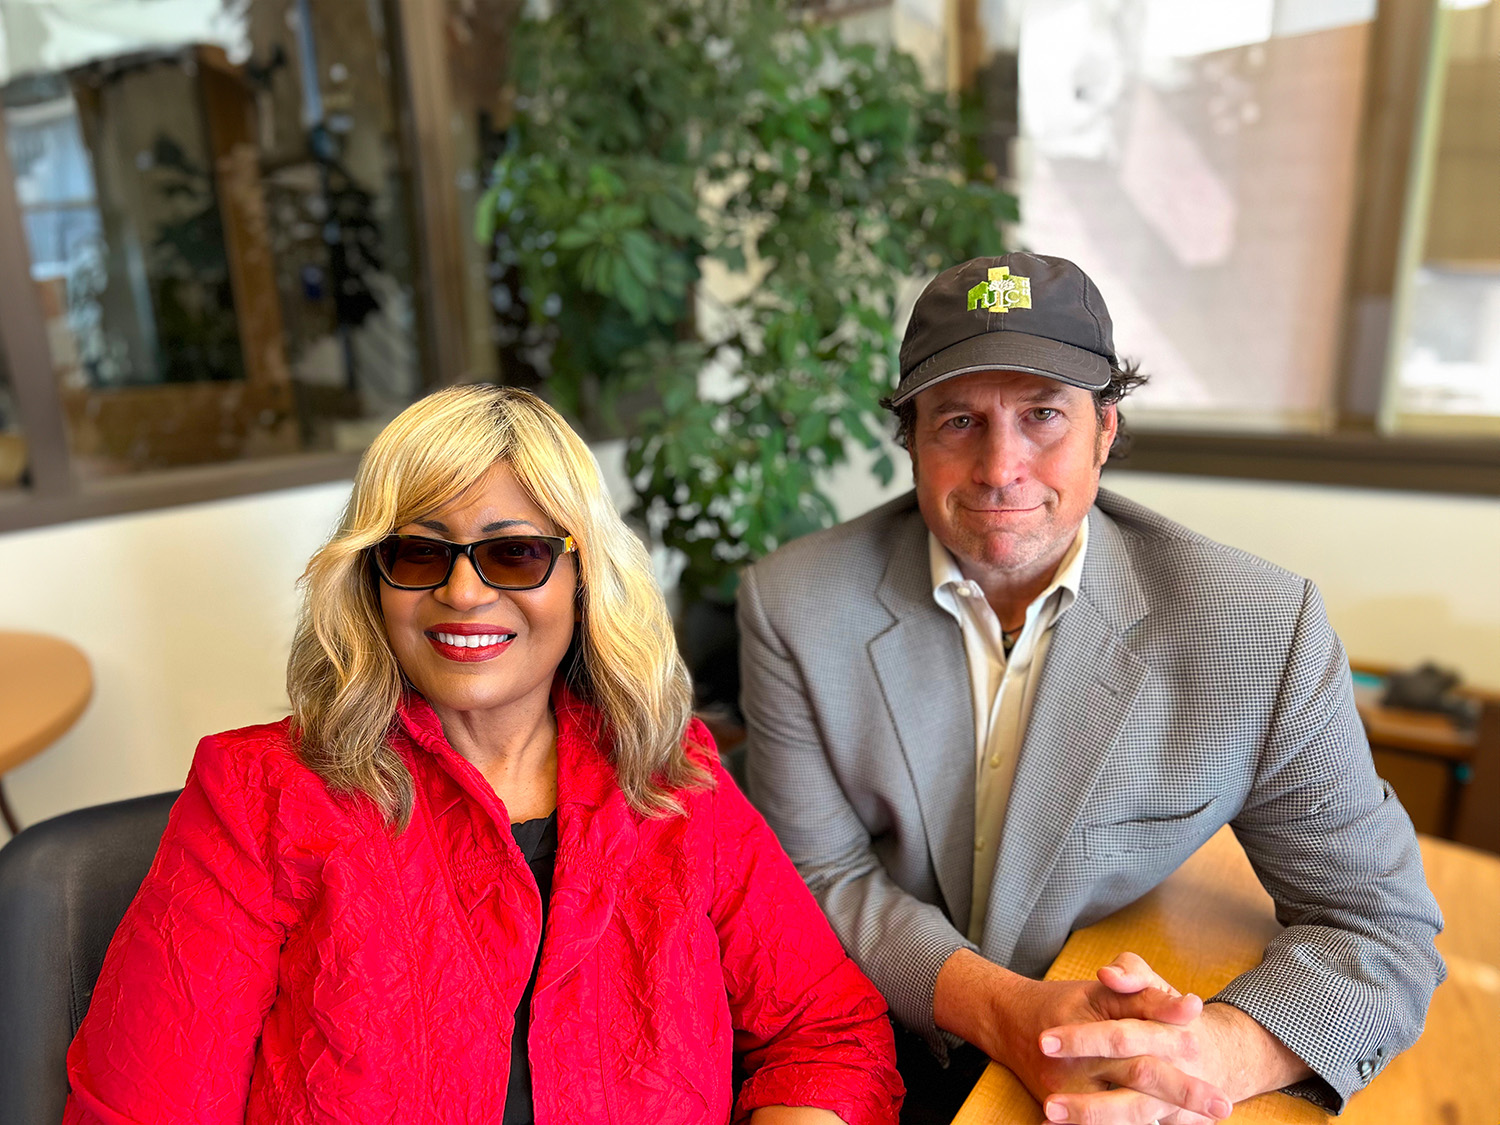 Woman in a red business jacket and sunglasses and a man in a sport coat with a baseball hat sit in a conference room smiling